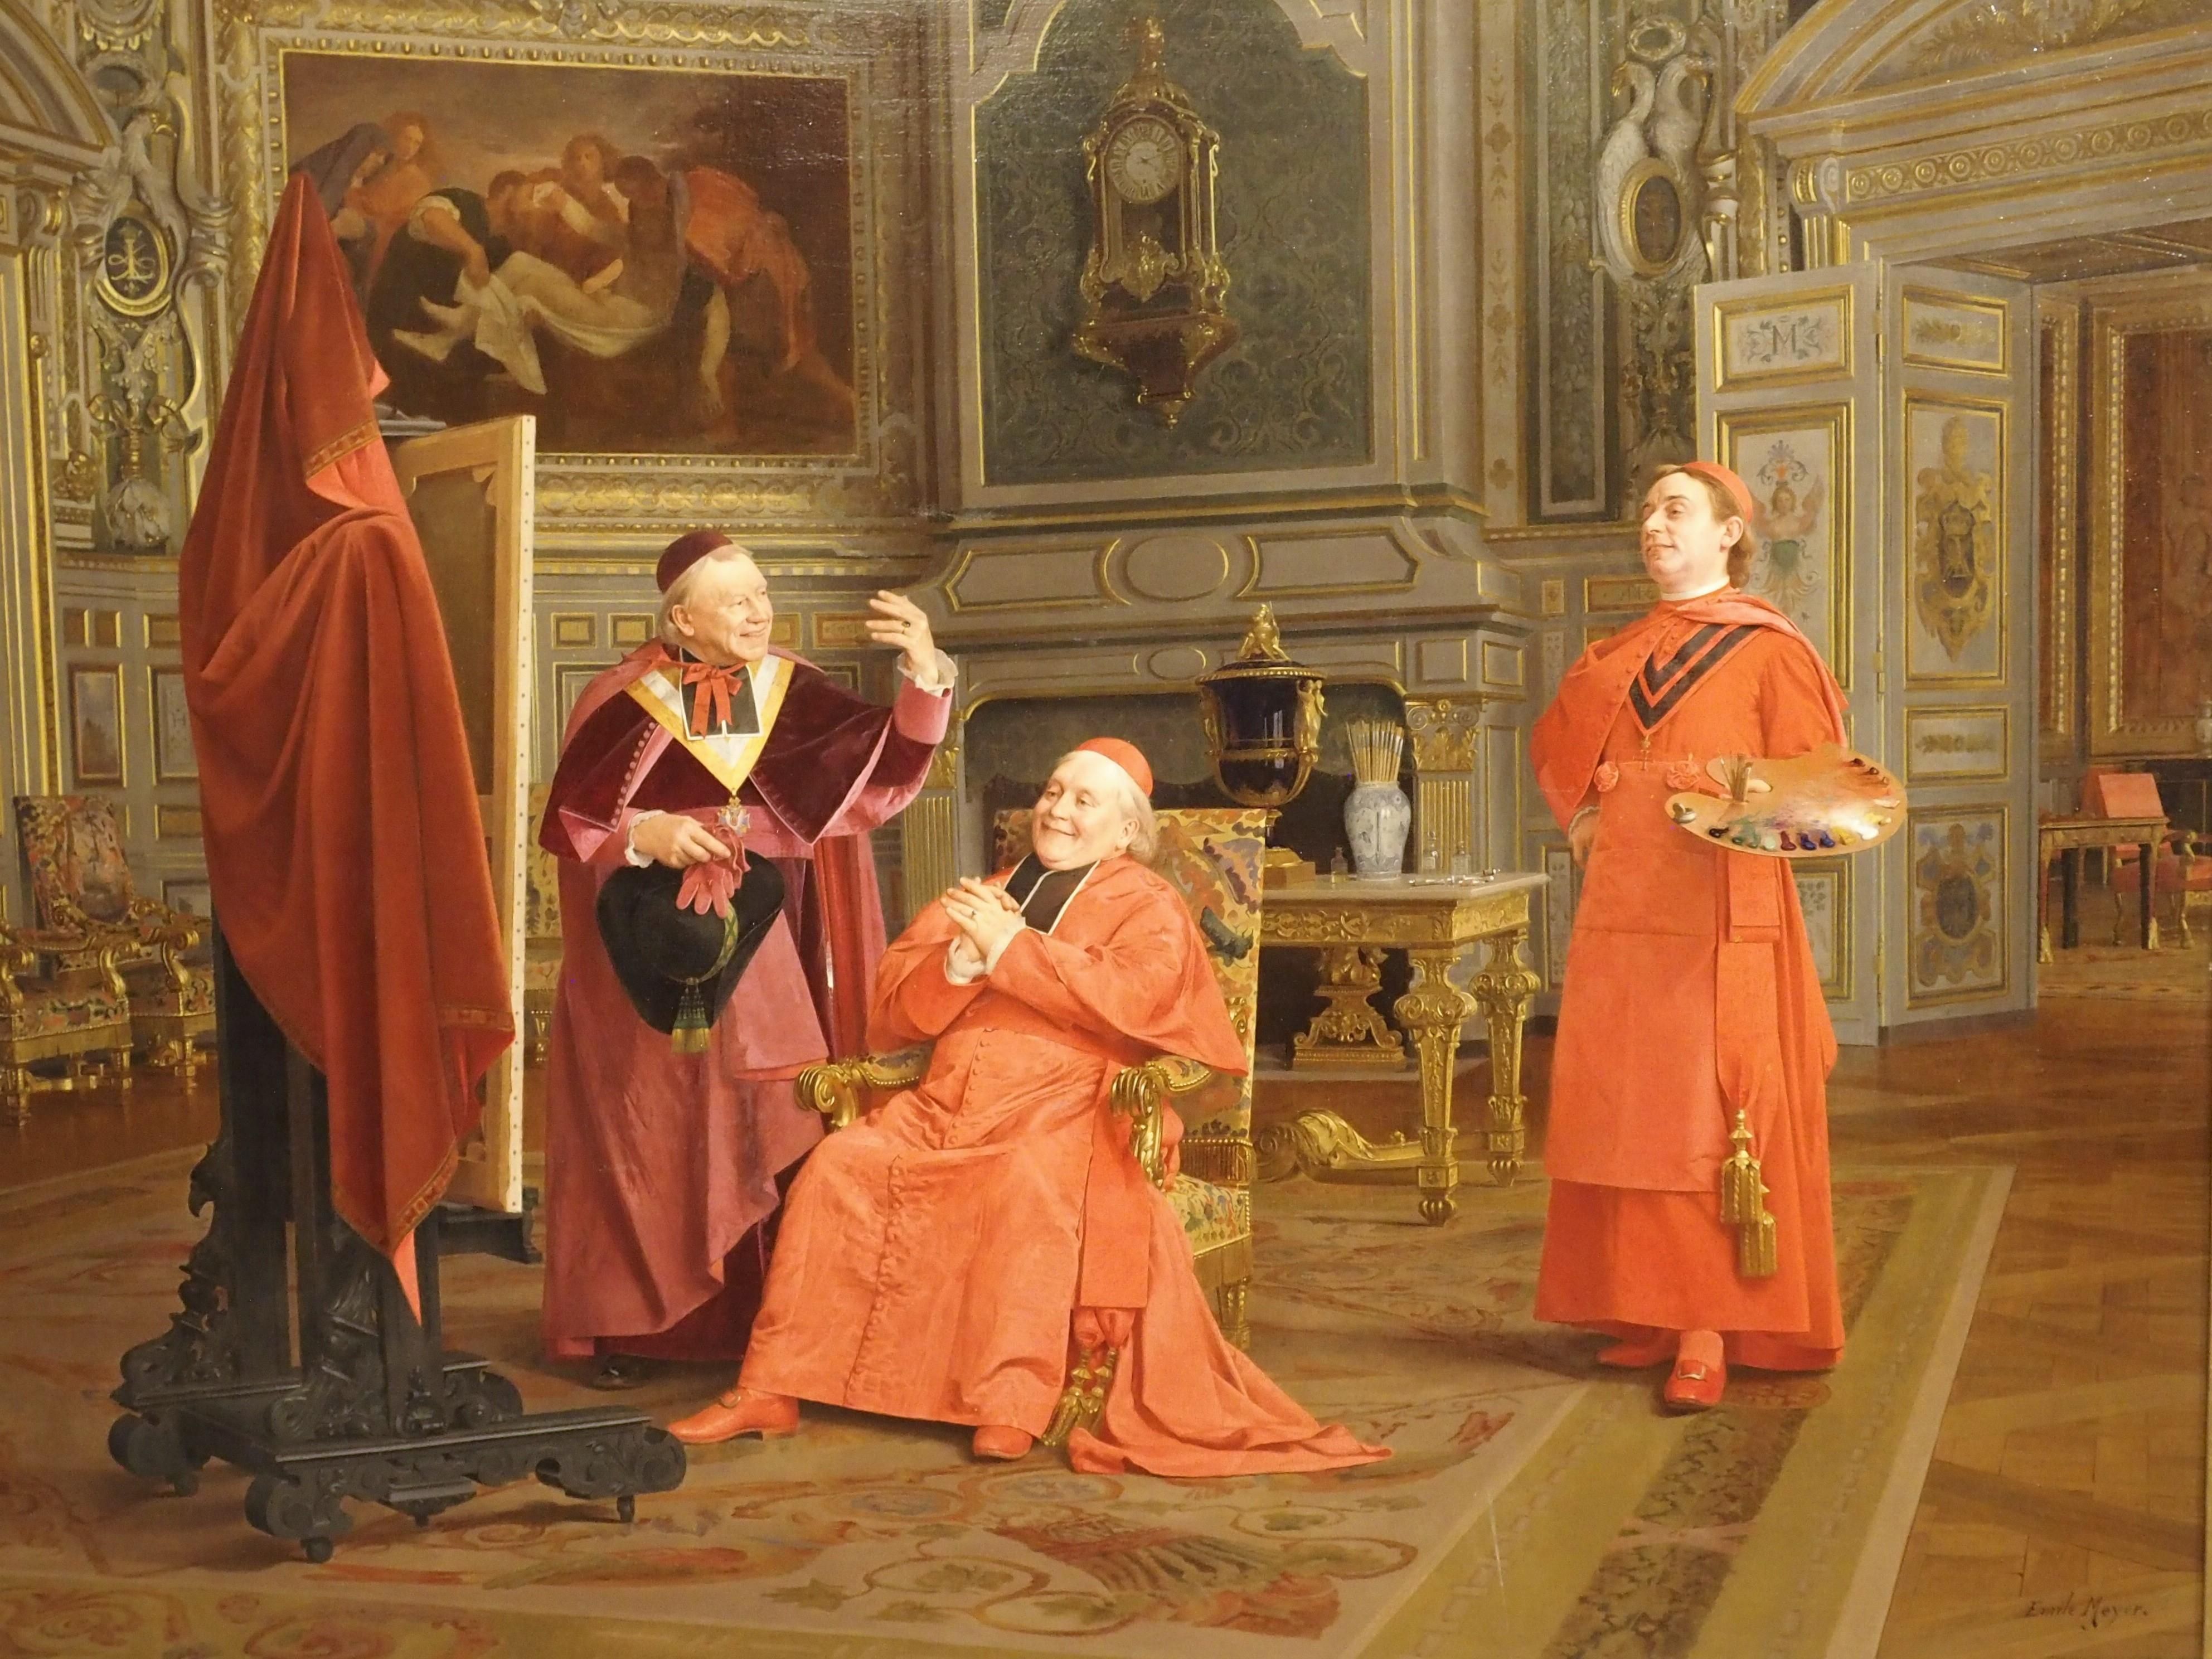 During the late 19th century, the French system of government, known as the Third Republic, began to distance itself from the Latin church. As a result, artists at French academies of art began to produce works known as “cardinal paintings”, which